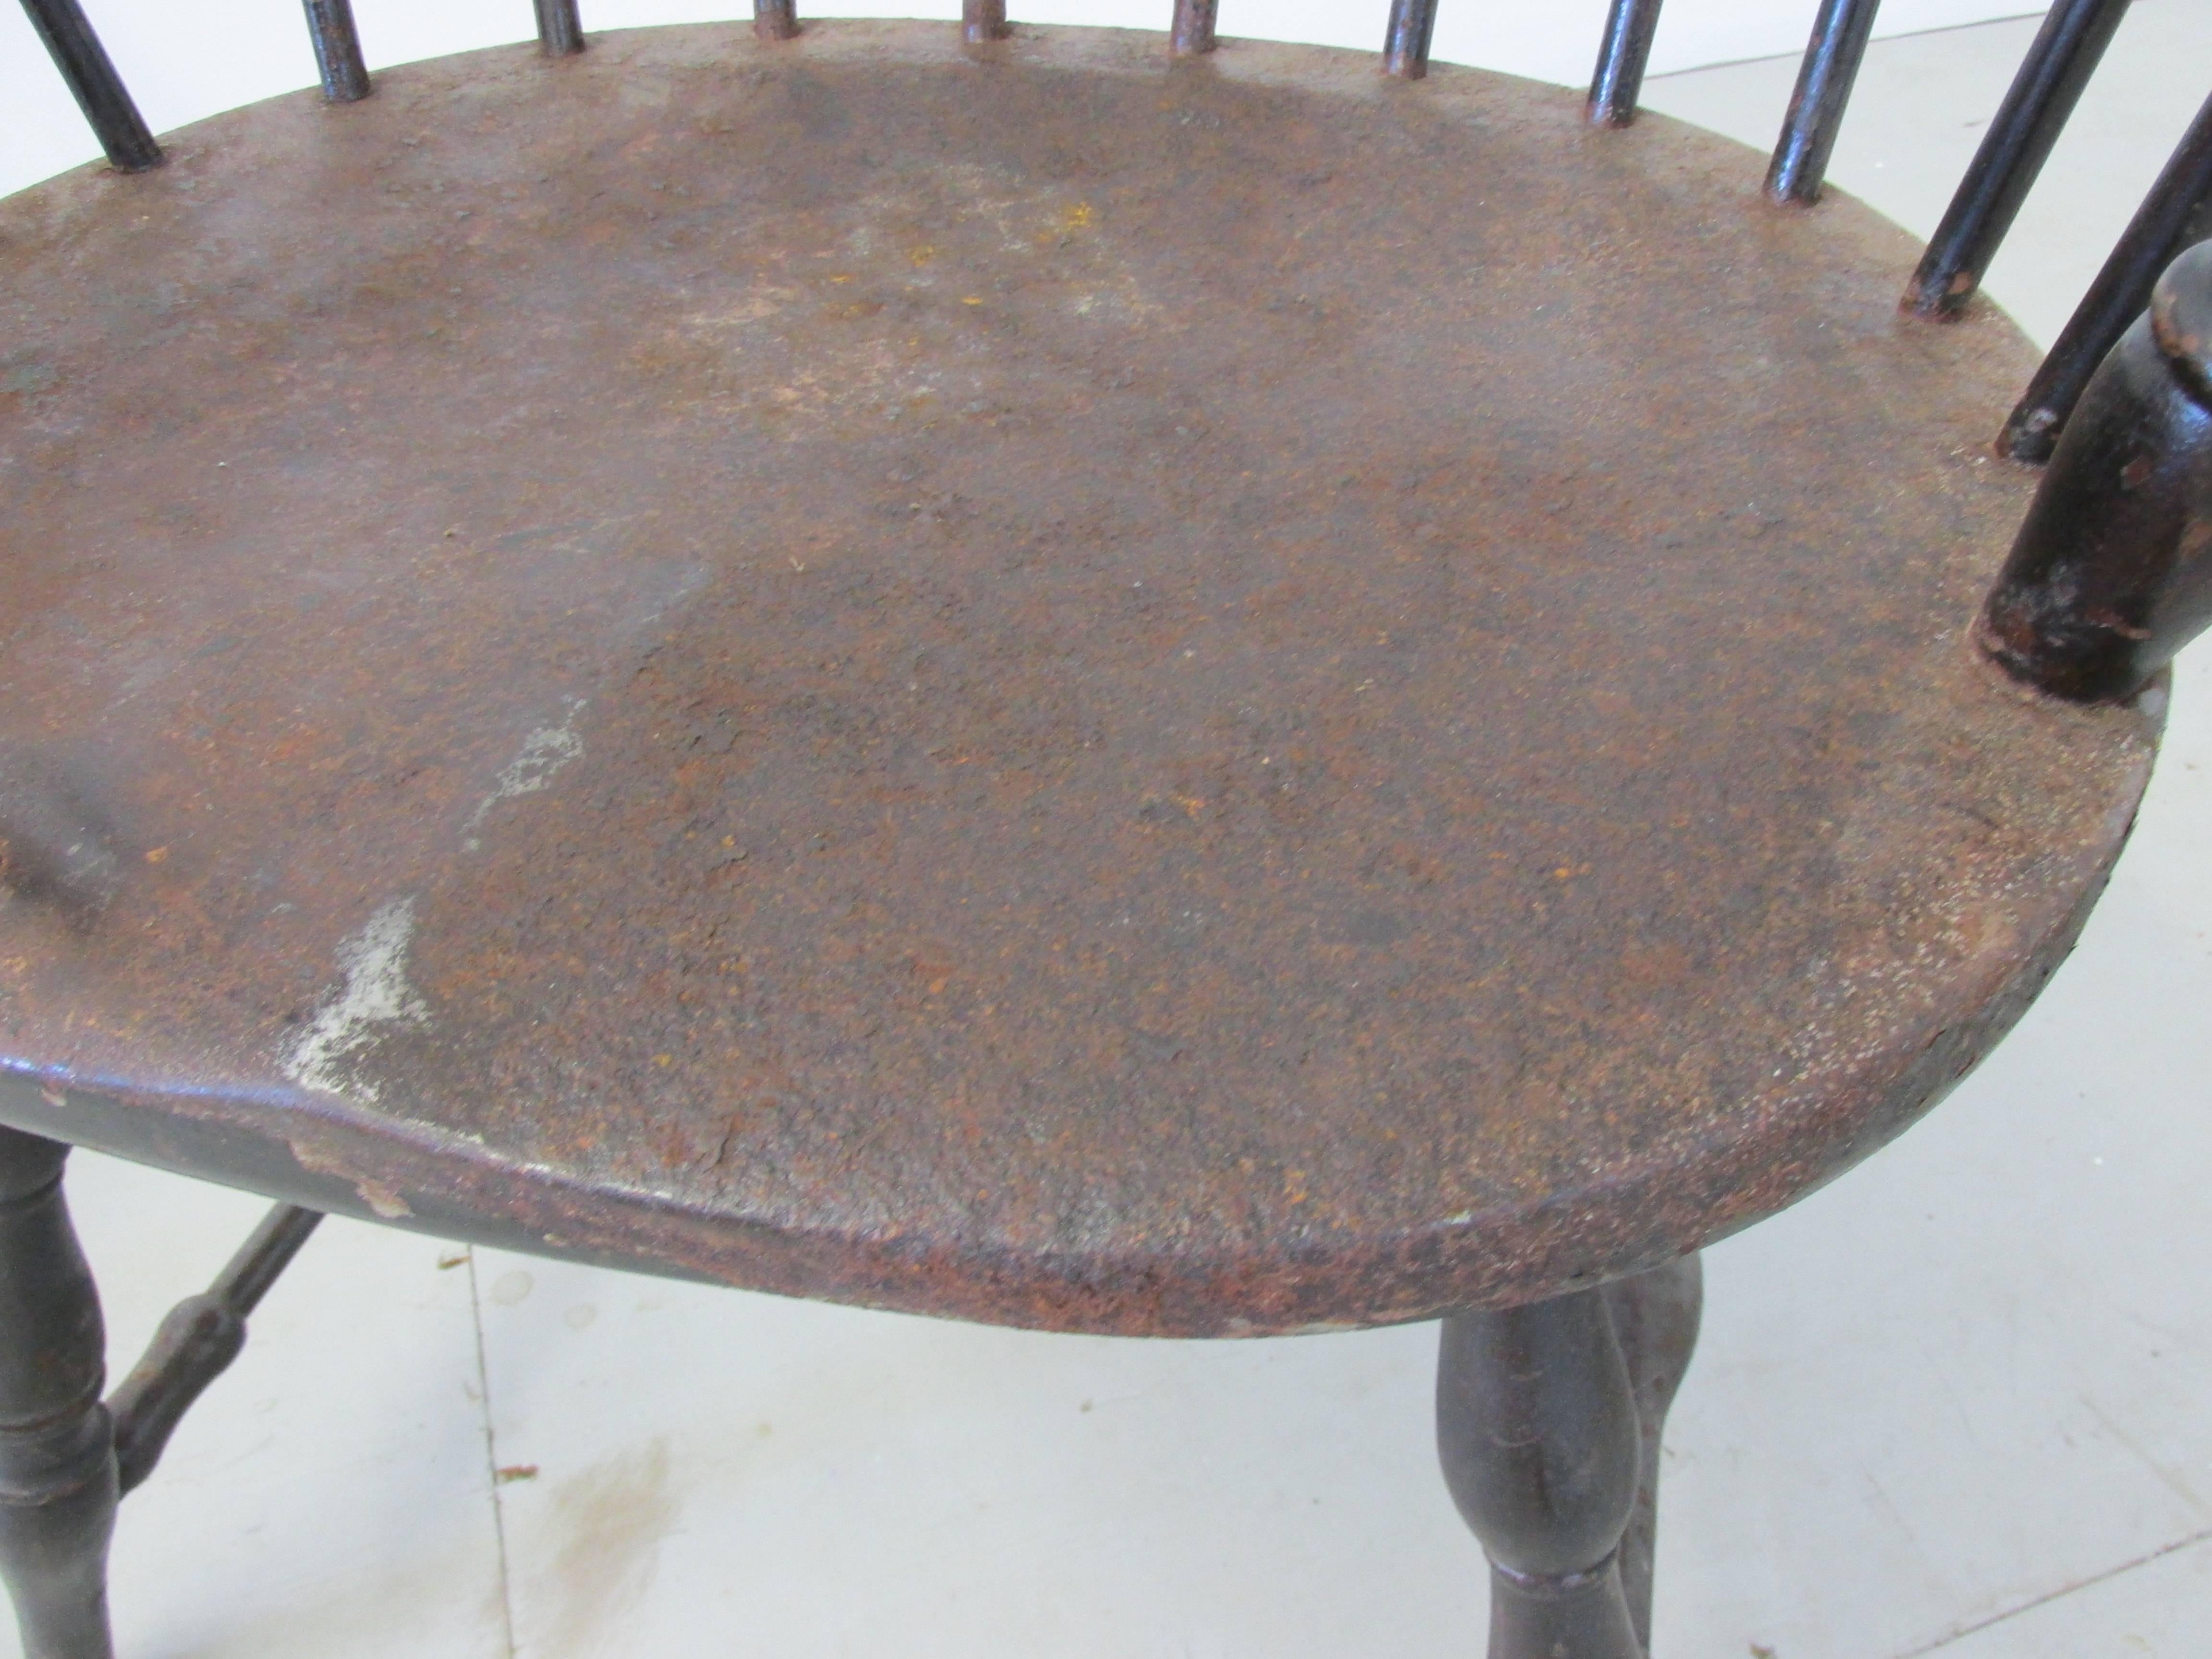 Pair of metal windsor chairs by Canton Art Metal Company of Canton Ohio. Produced in the 1930s. This pair shows loss of paint and surface rust, but originally had a faux wood grained finish. This pair is said to be from the Philadelphia Main